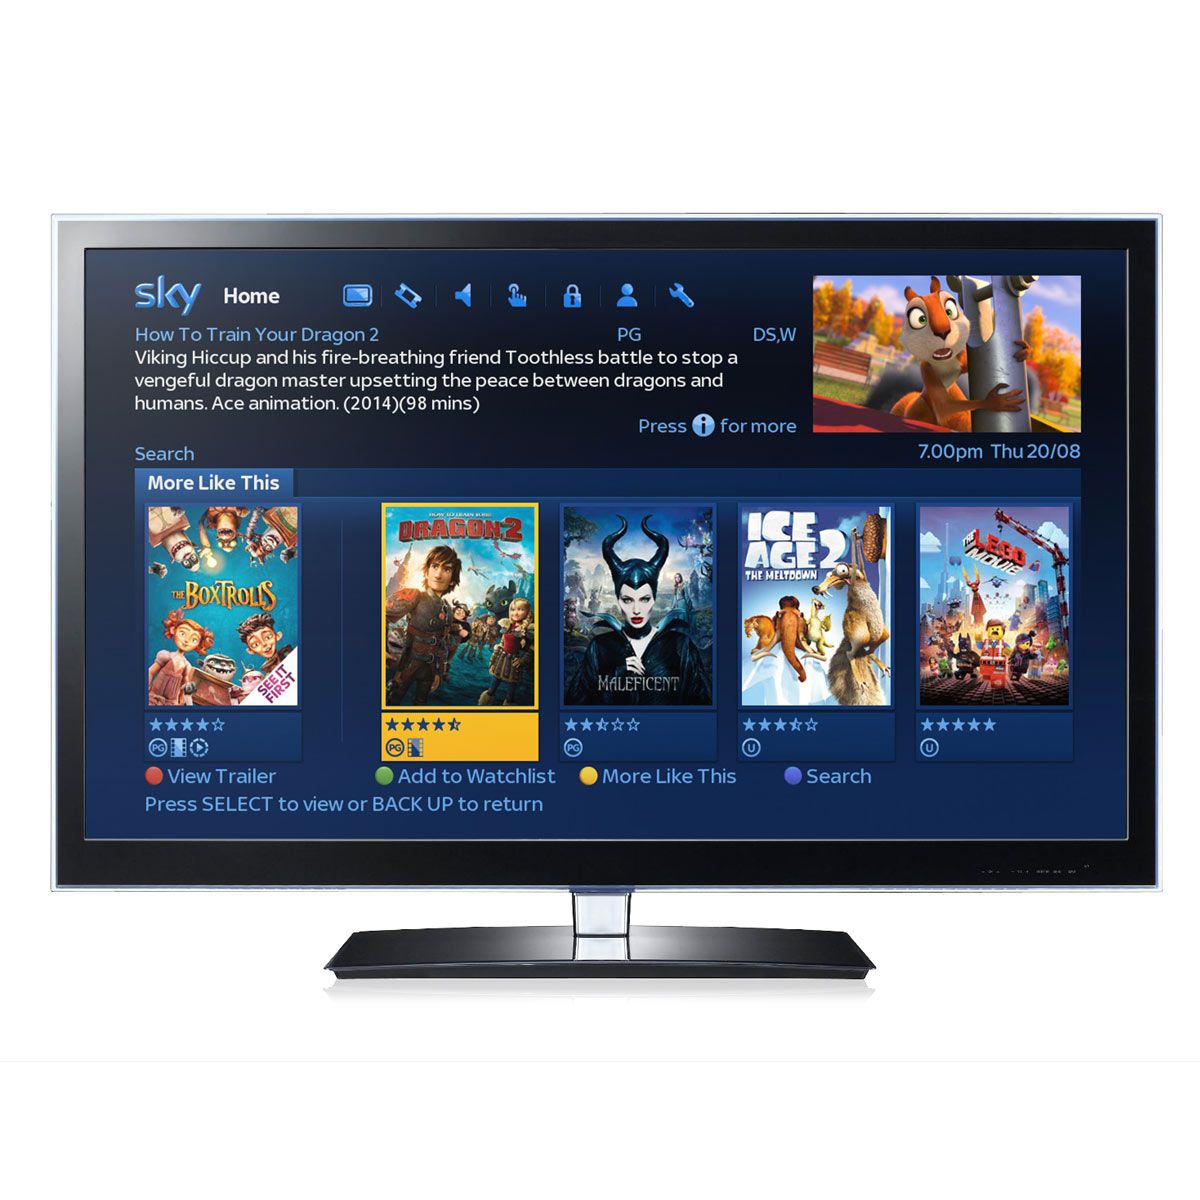 Sky brings recommendations and other new features to Sky+HD customers